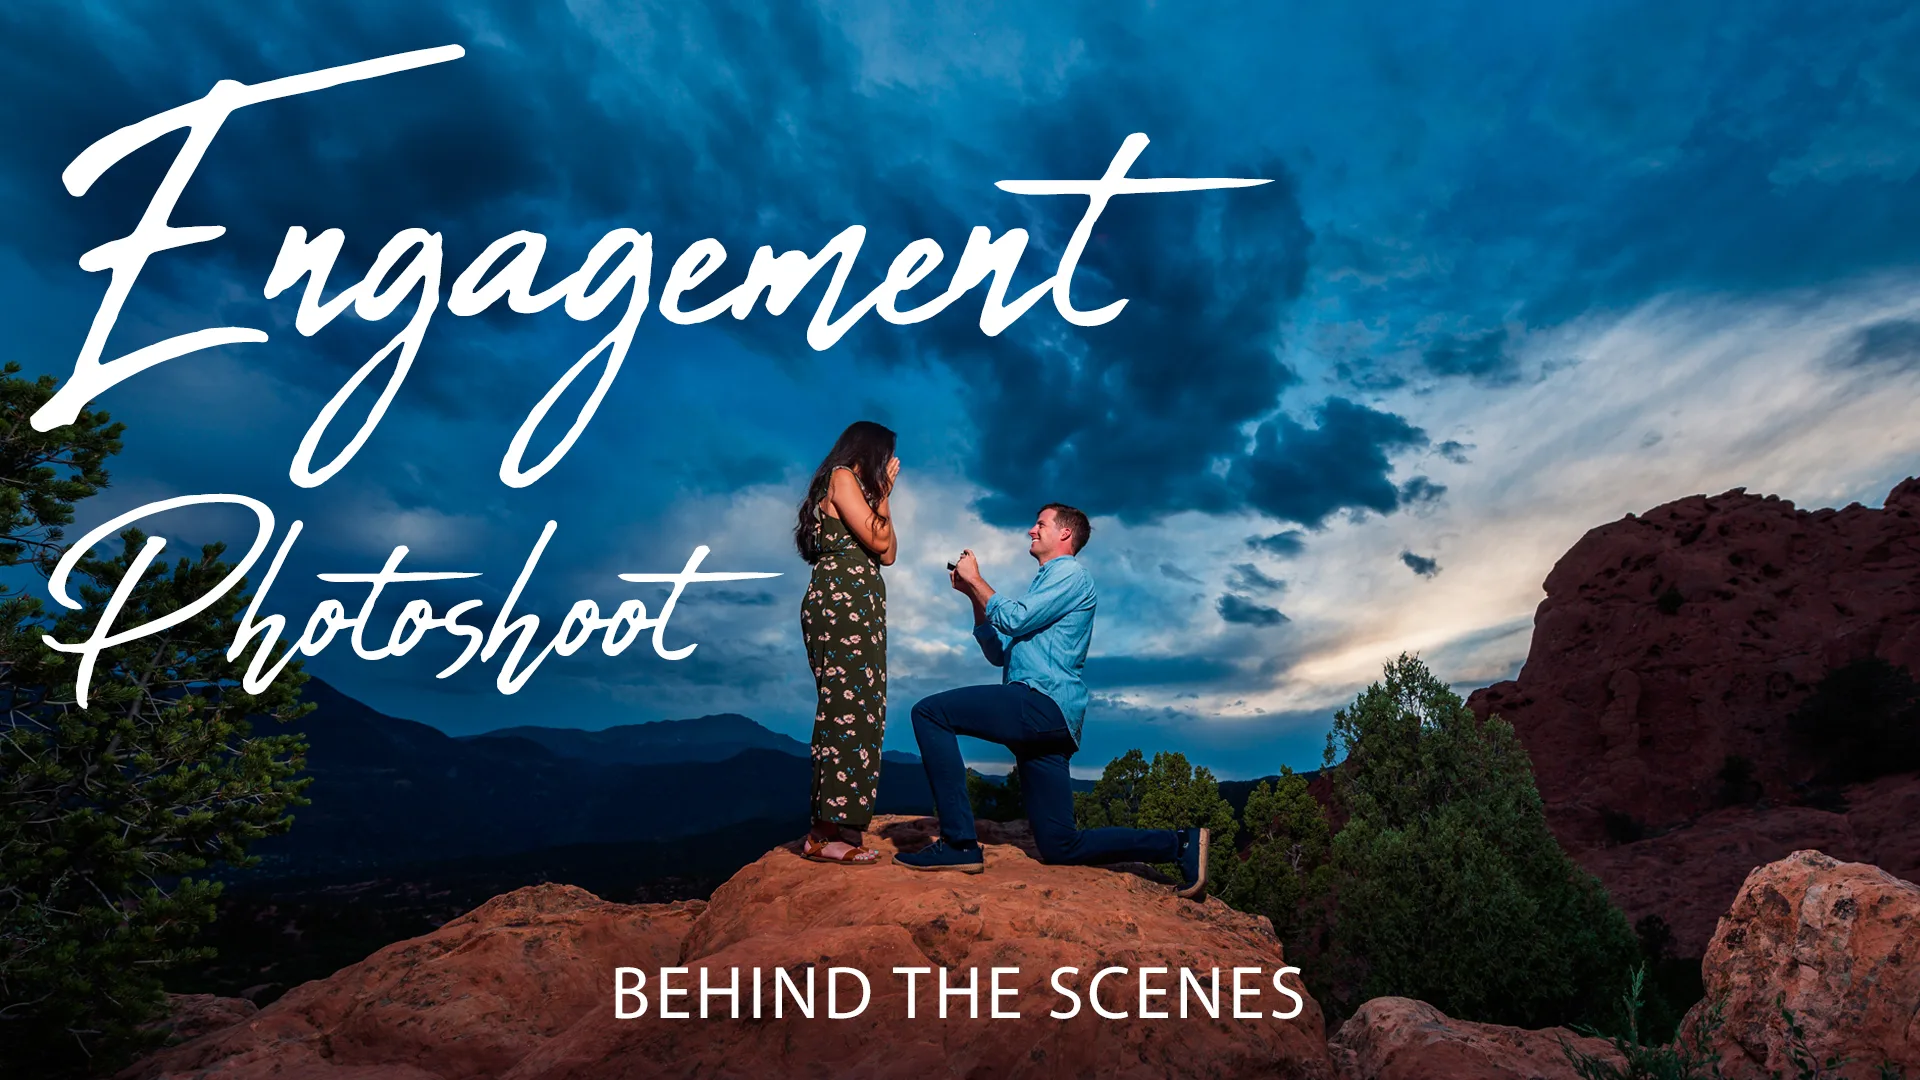 You are currently viewing Behind the Scenes: Engagement Photoshoot